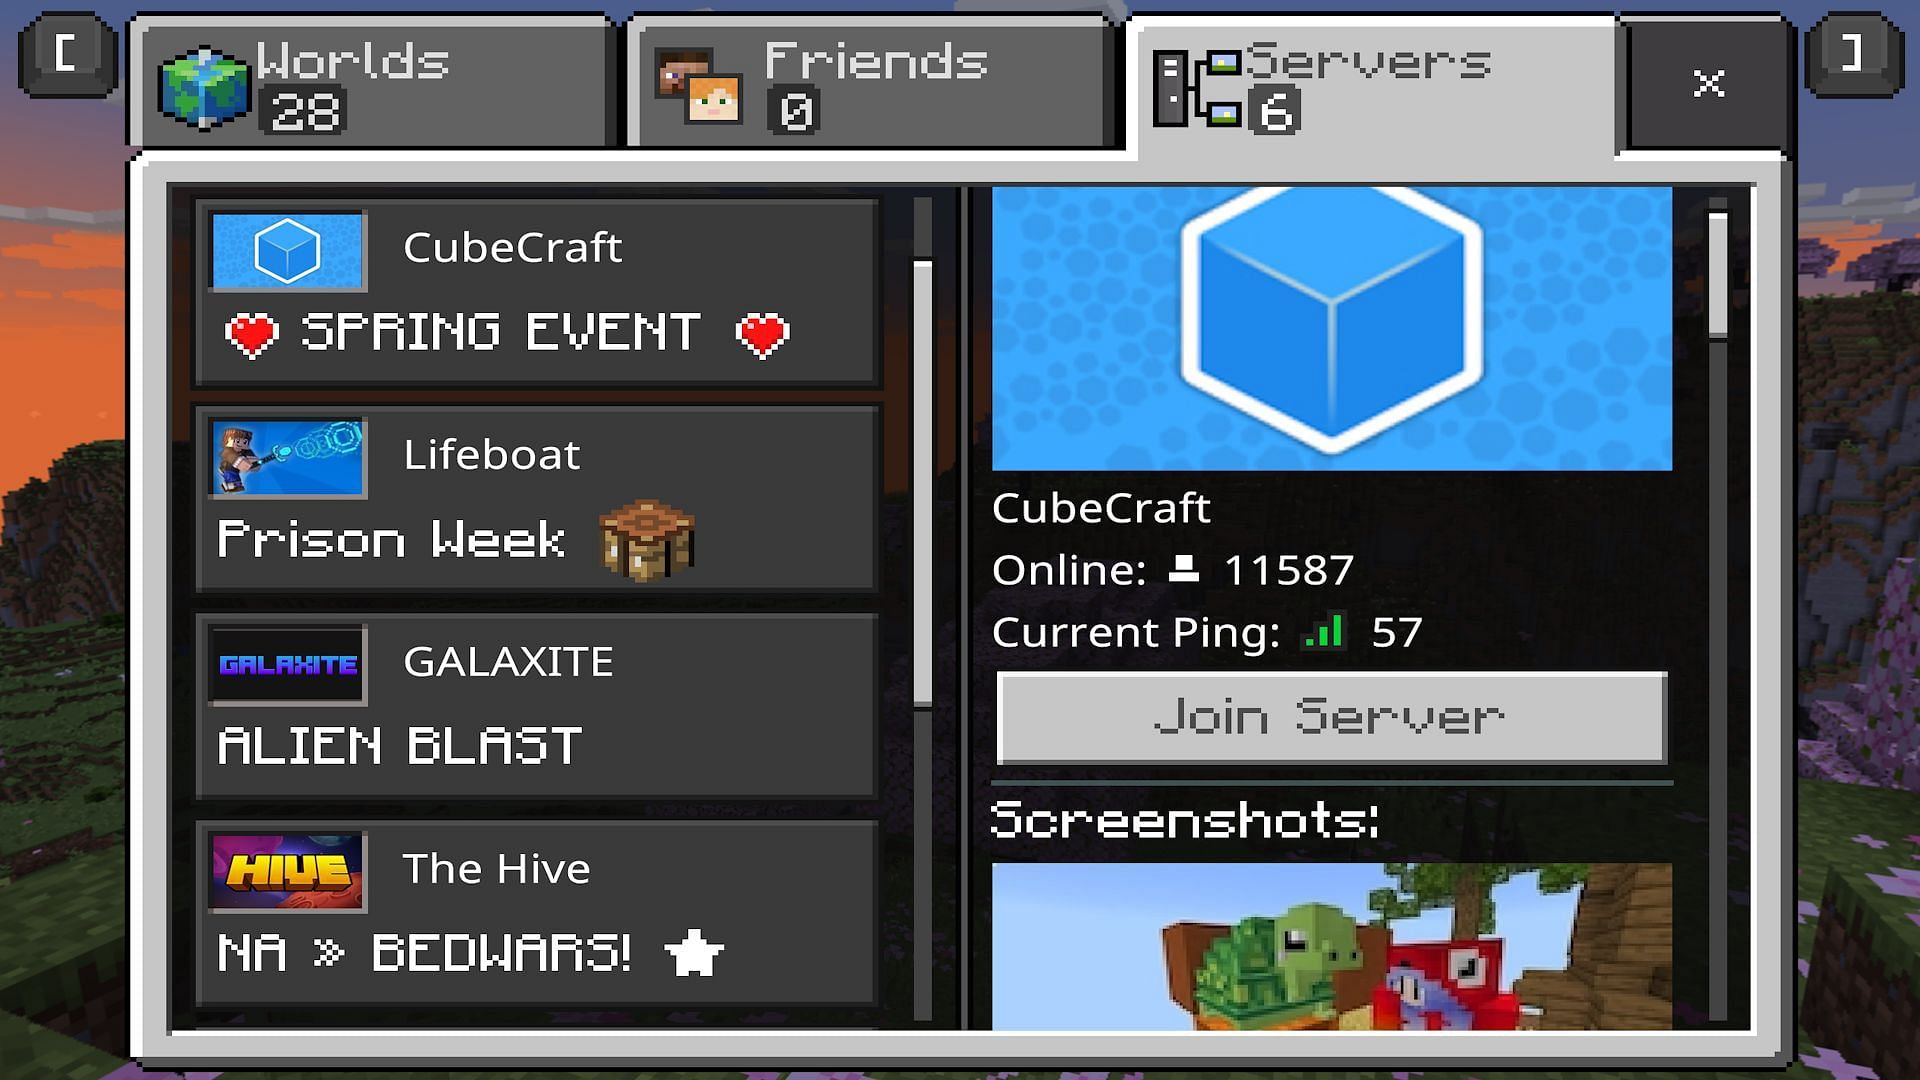 These featured servers have hunger games options (Image via Mojang)